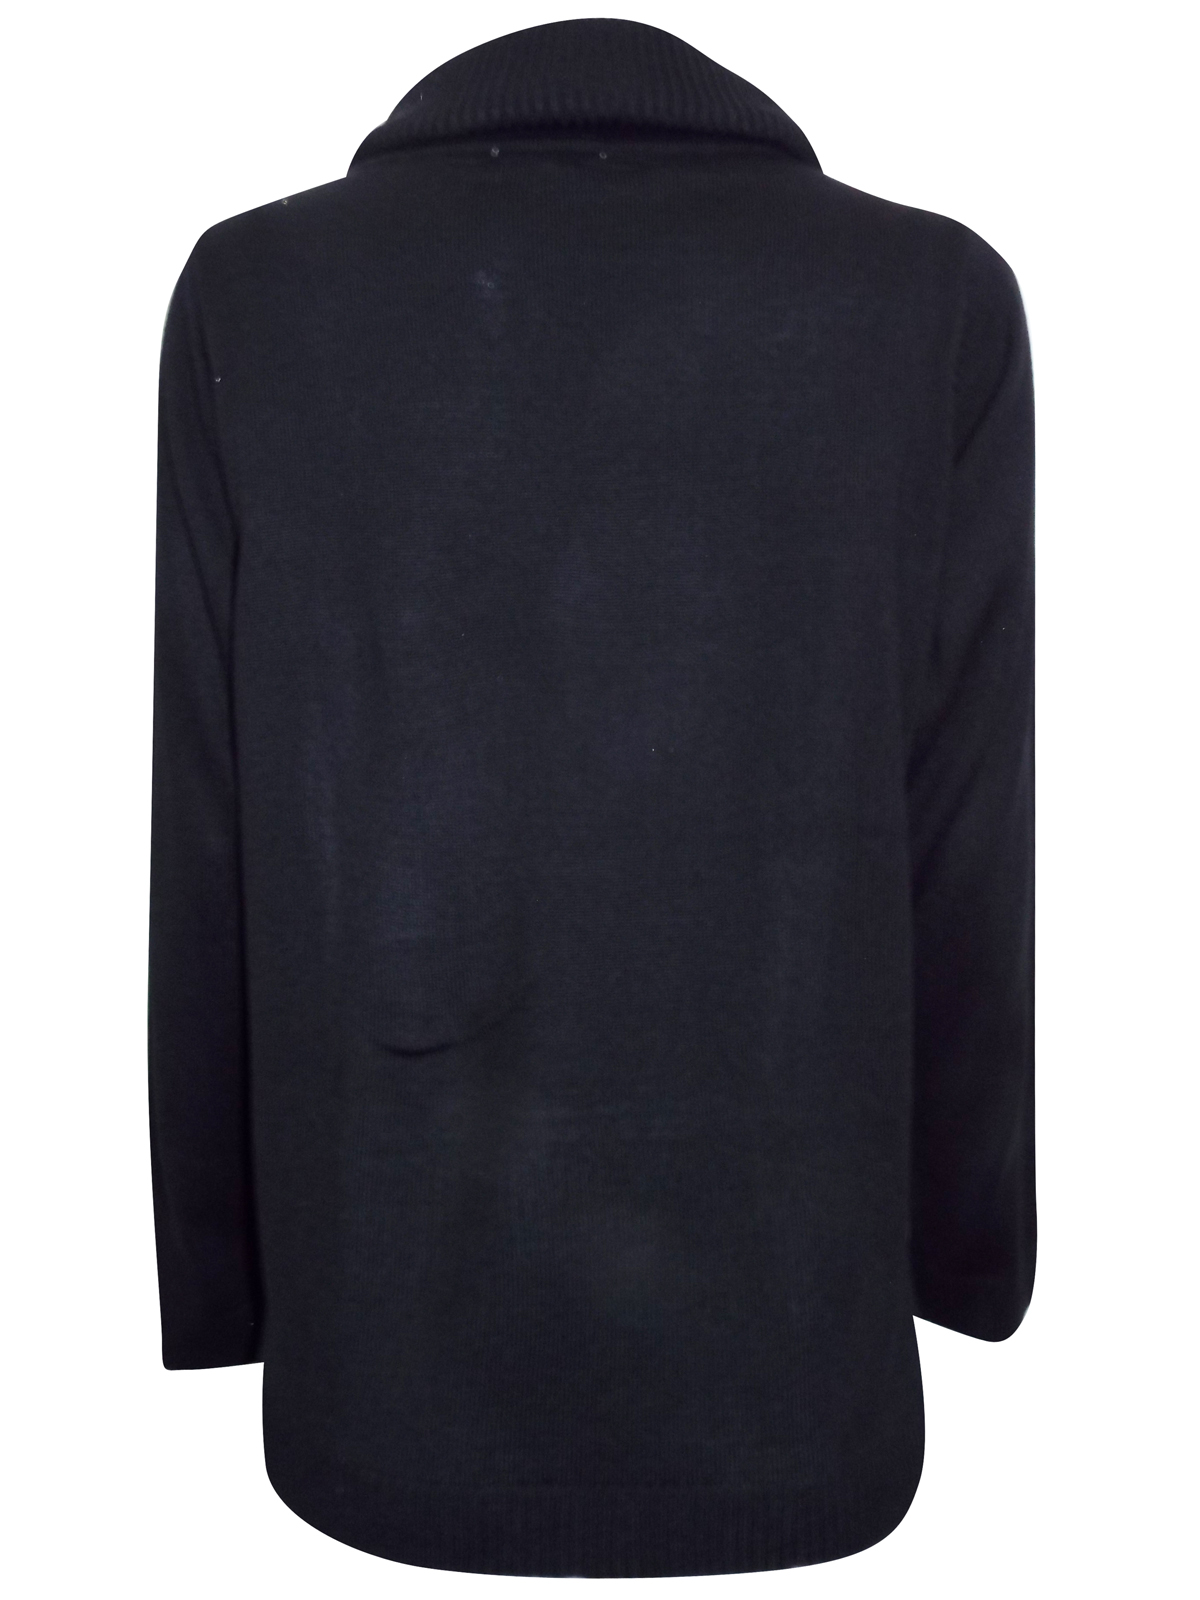 Fay Louise - - BLACK Rose Jacquard Panel Knitted Jumper - Size S/M to L/XL